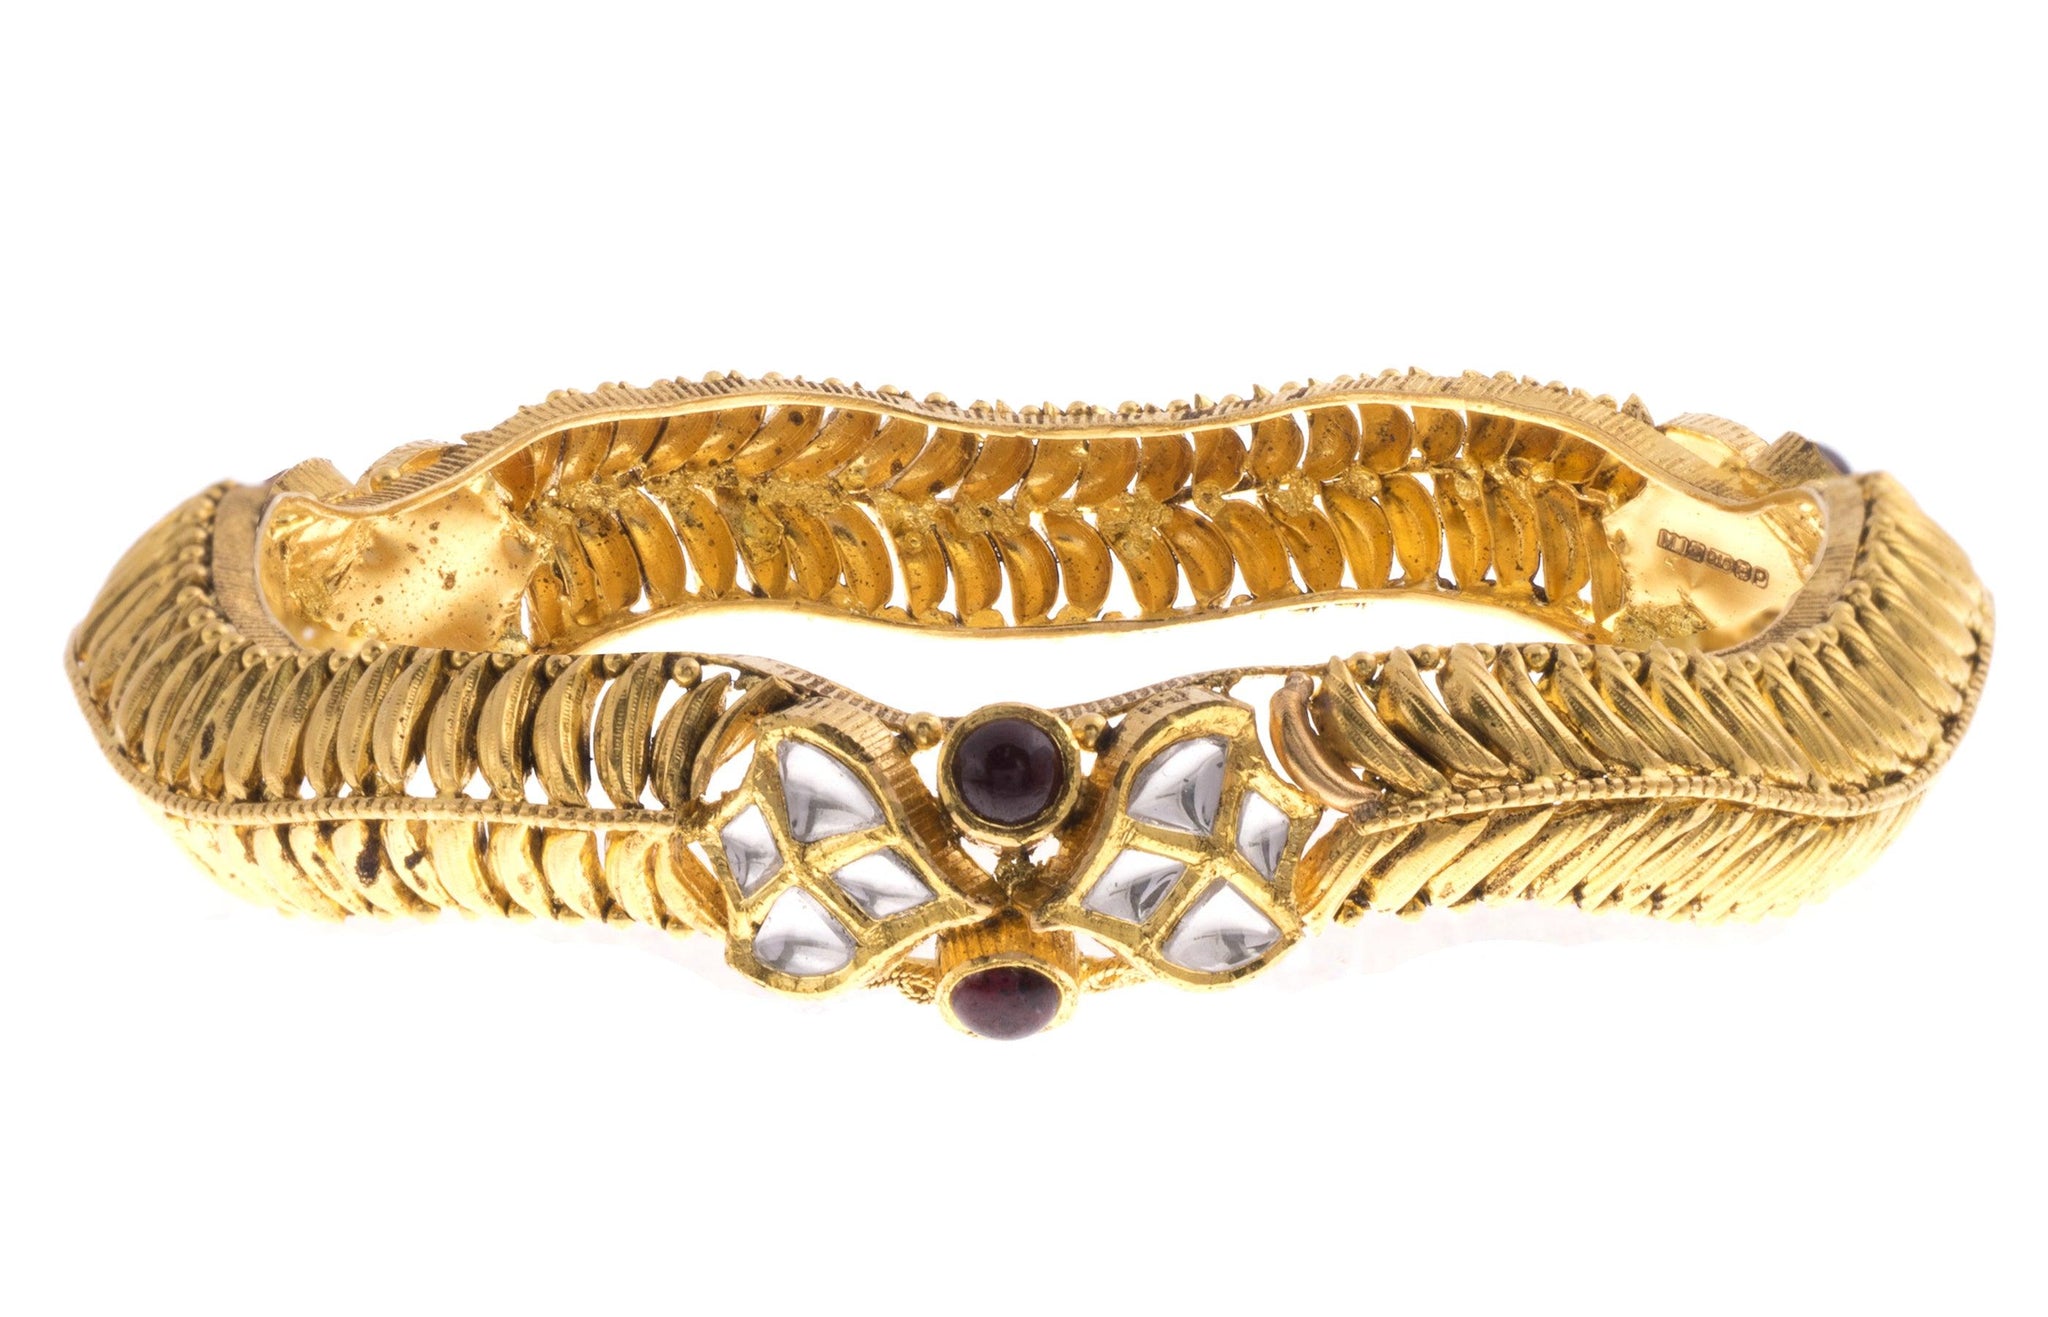 22ct Yellow Gold Antiquated Look Bangle with Synthetic Stones B-1582